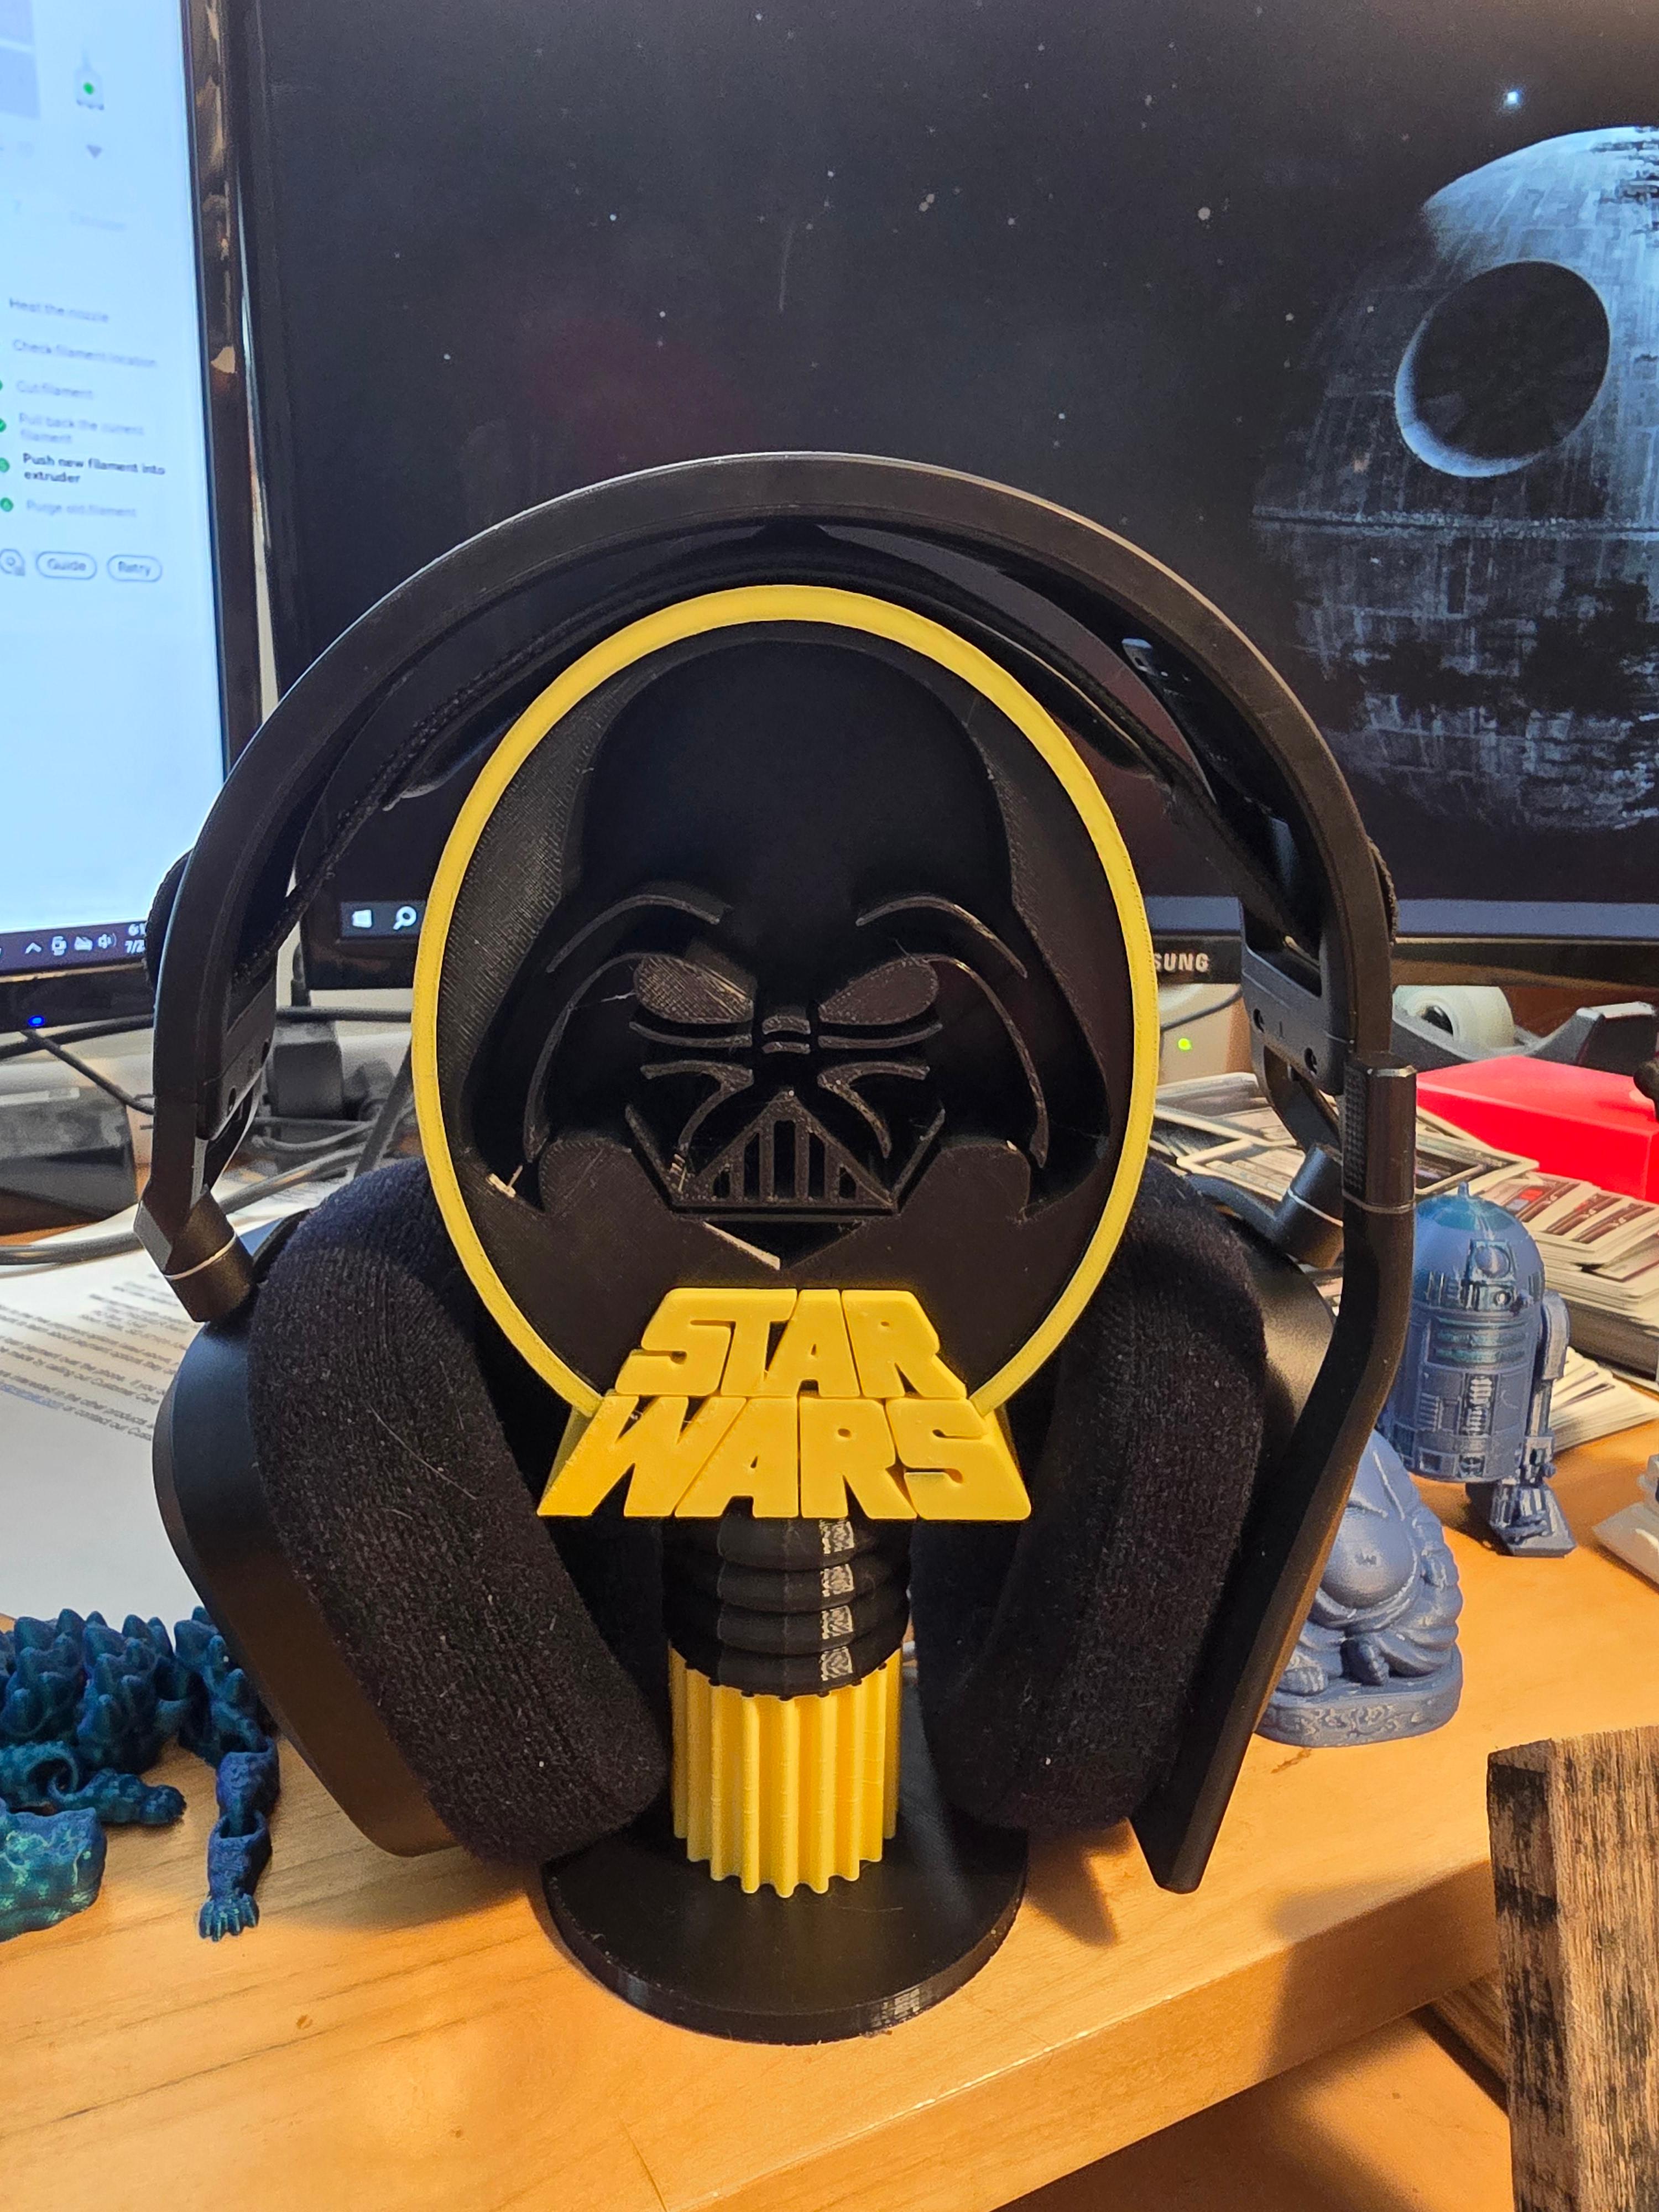 Star Wars Darth Vader Headphone Stand - Just what I needed for my headphones, and totally in my theme. Zyltech Glossy Black and PolyTerra Savannah Yellow. - 3d model